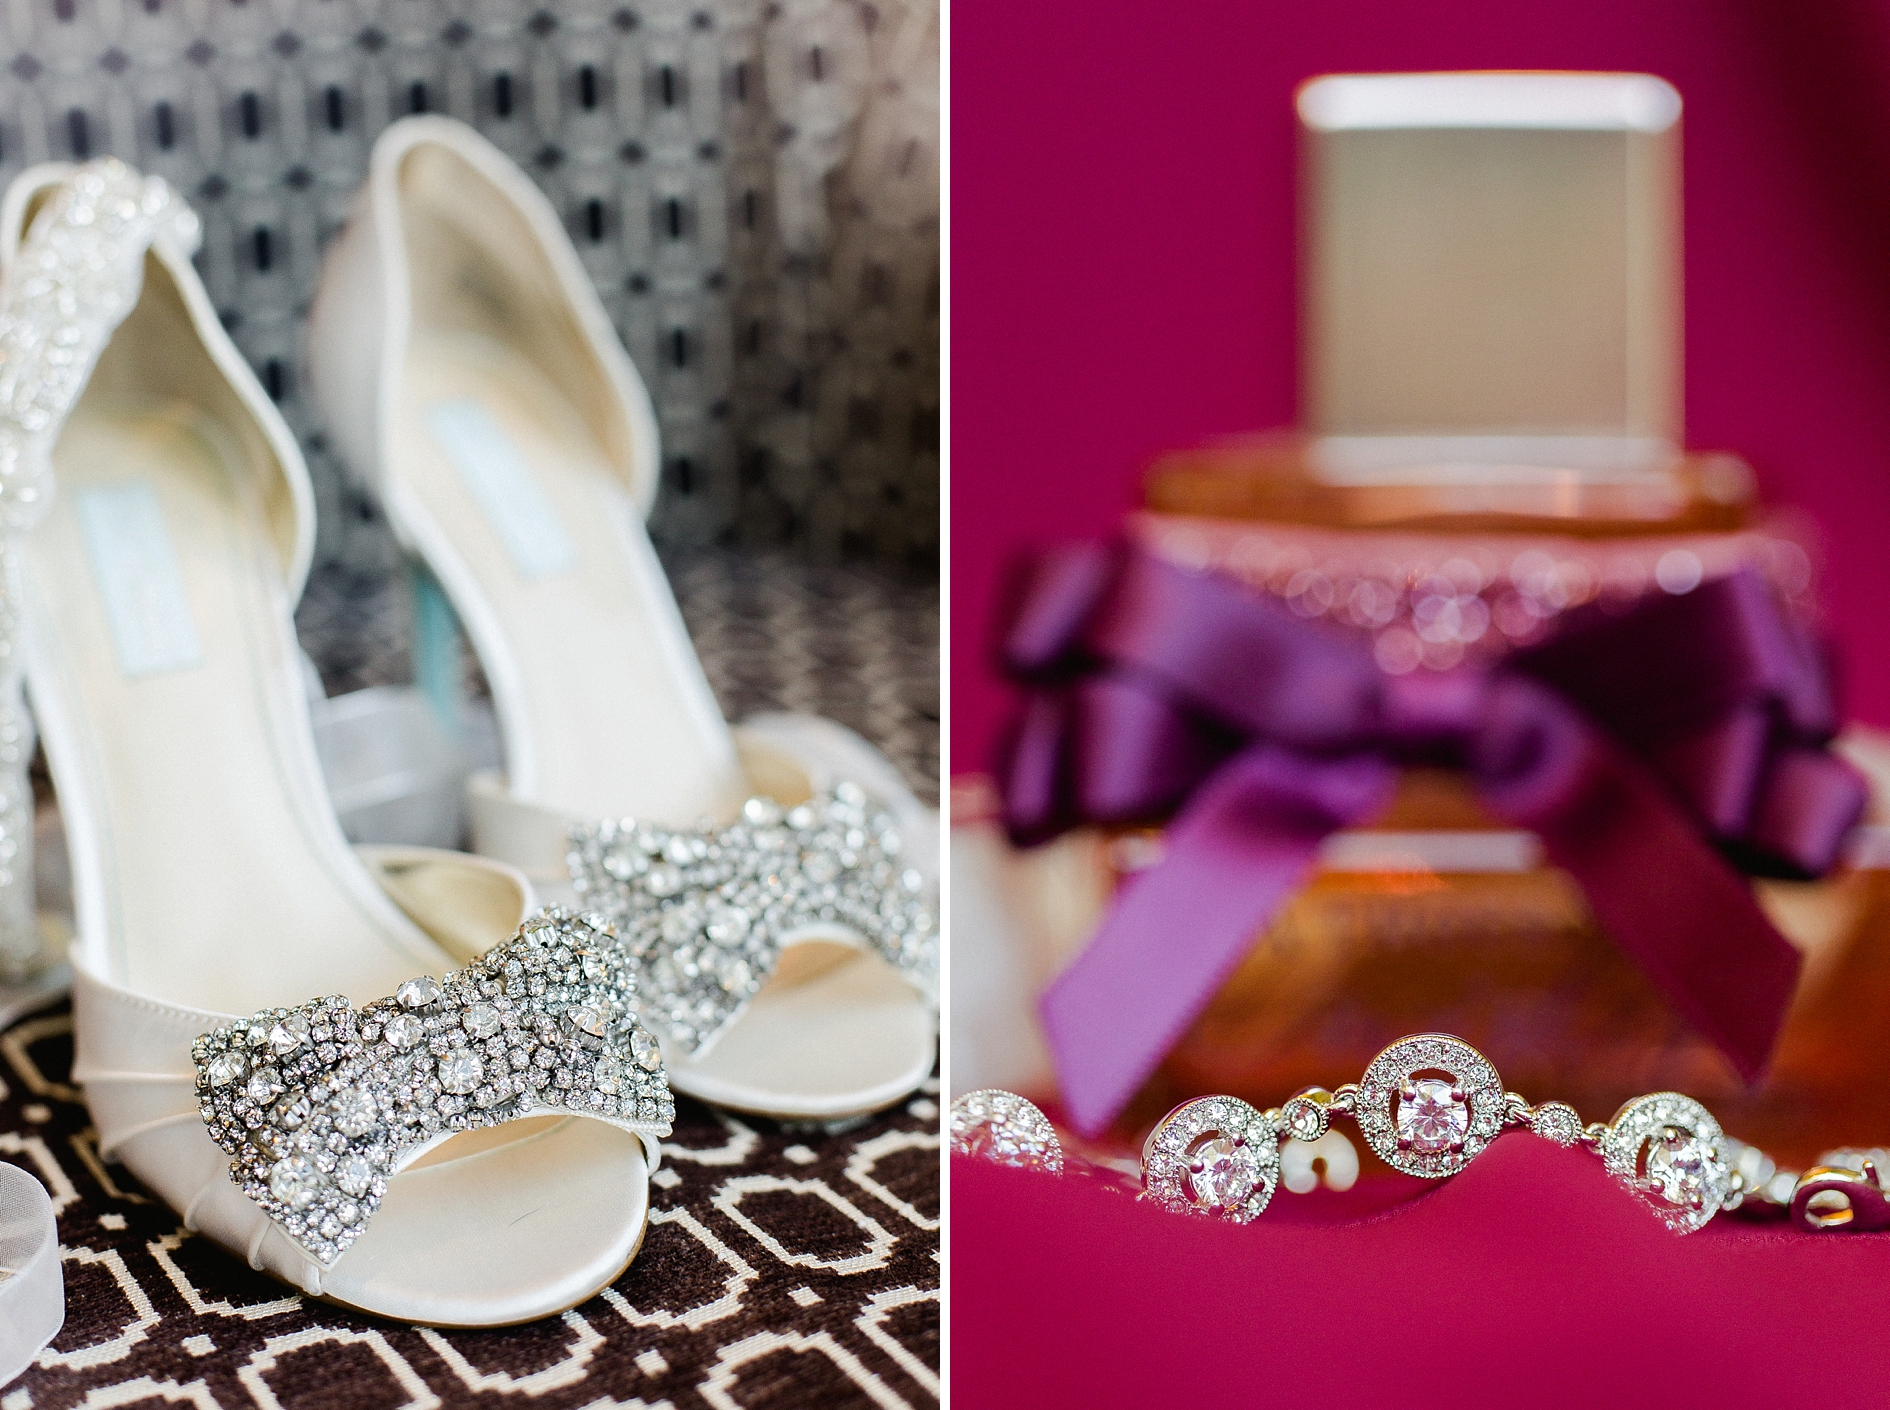 South Florida Museum Wedding | © Ailyn La Torre Photography 2015